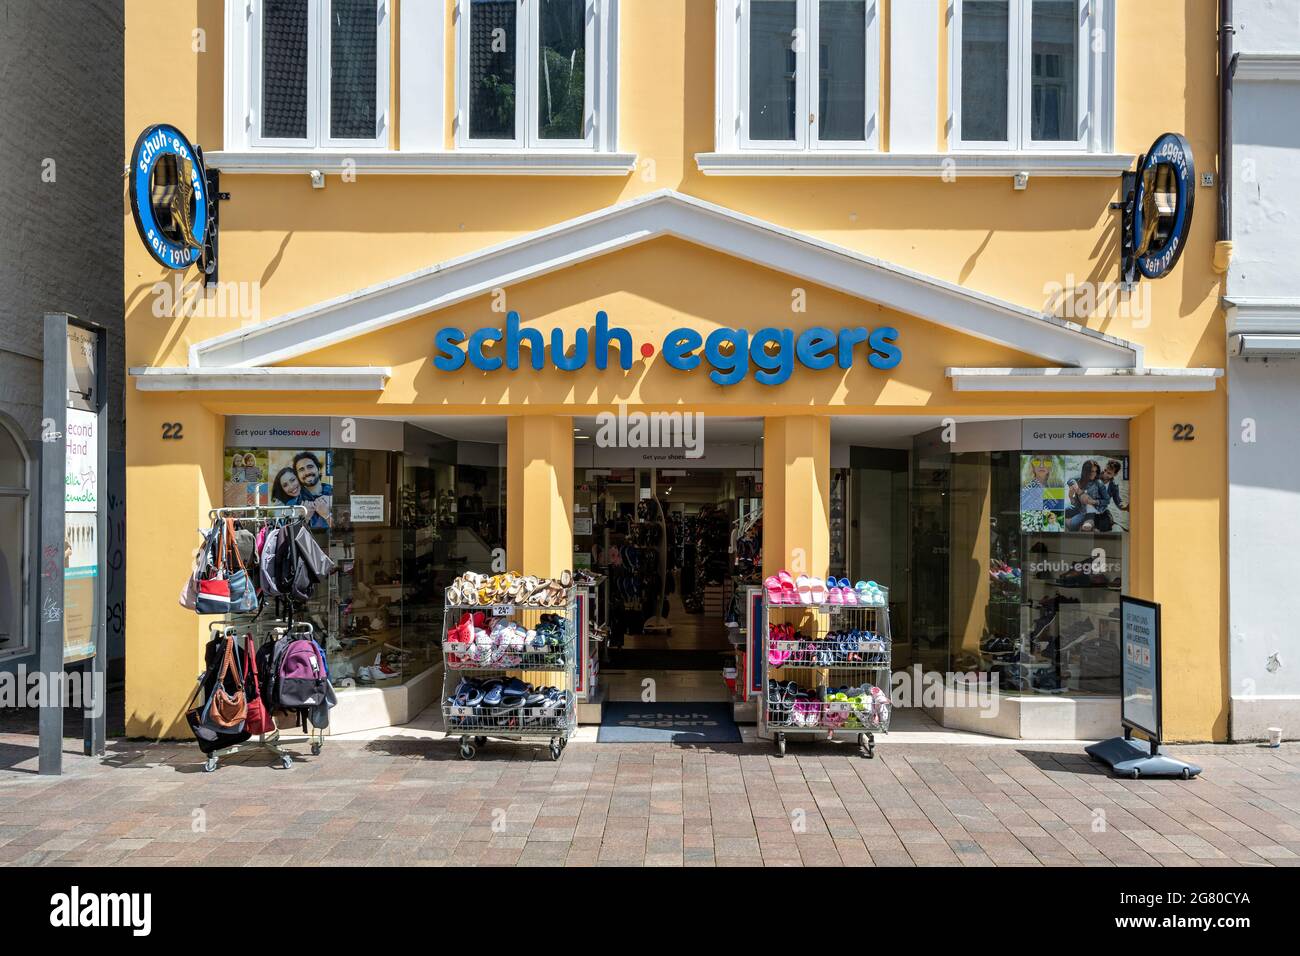 Schuh Eggers footwear store in Flensburg, Germany Stock Photo - Alamy